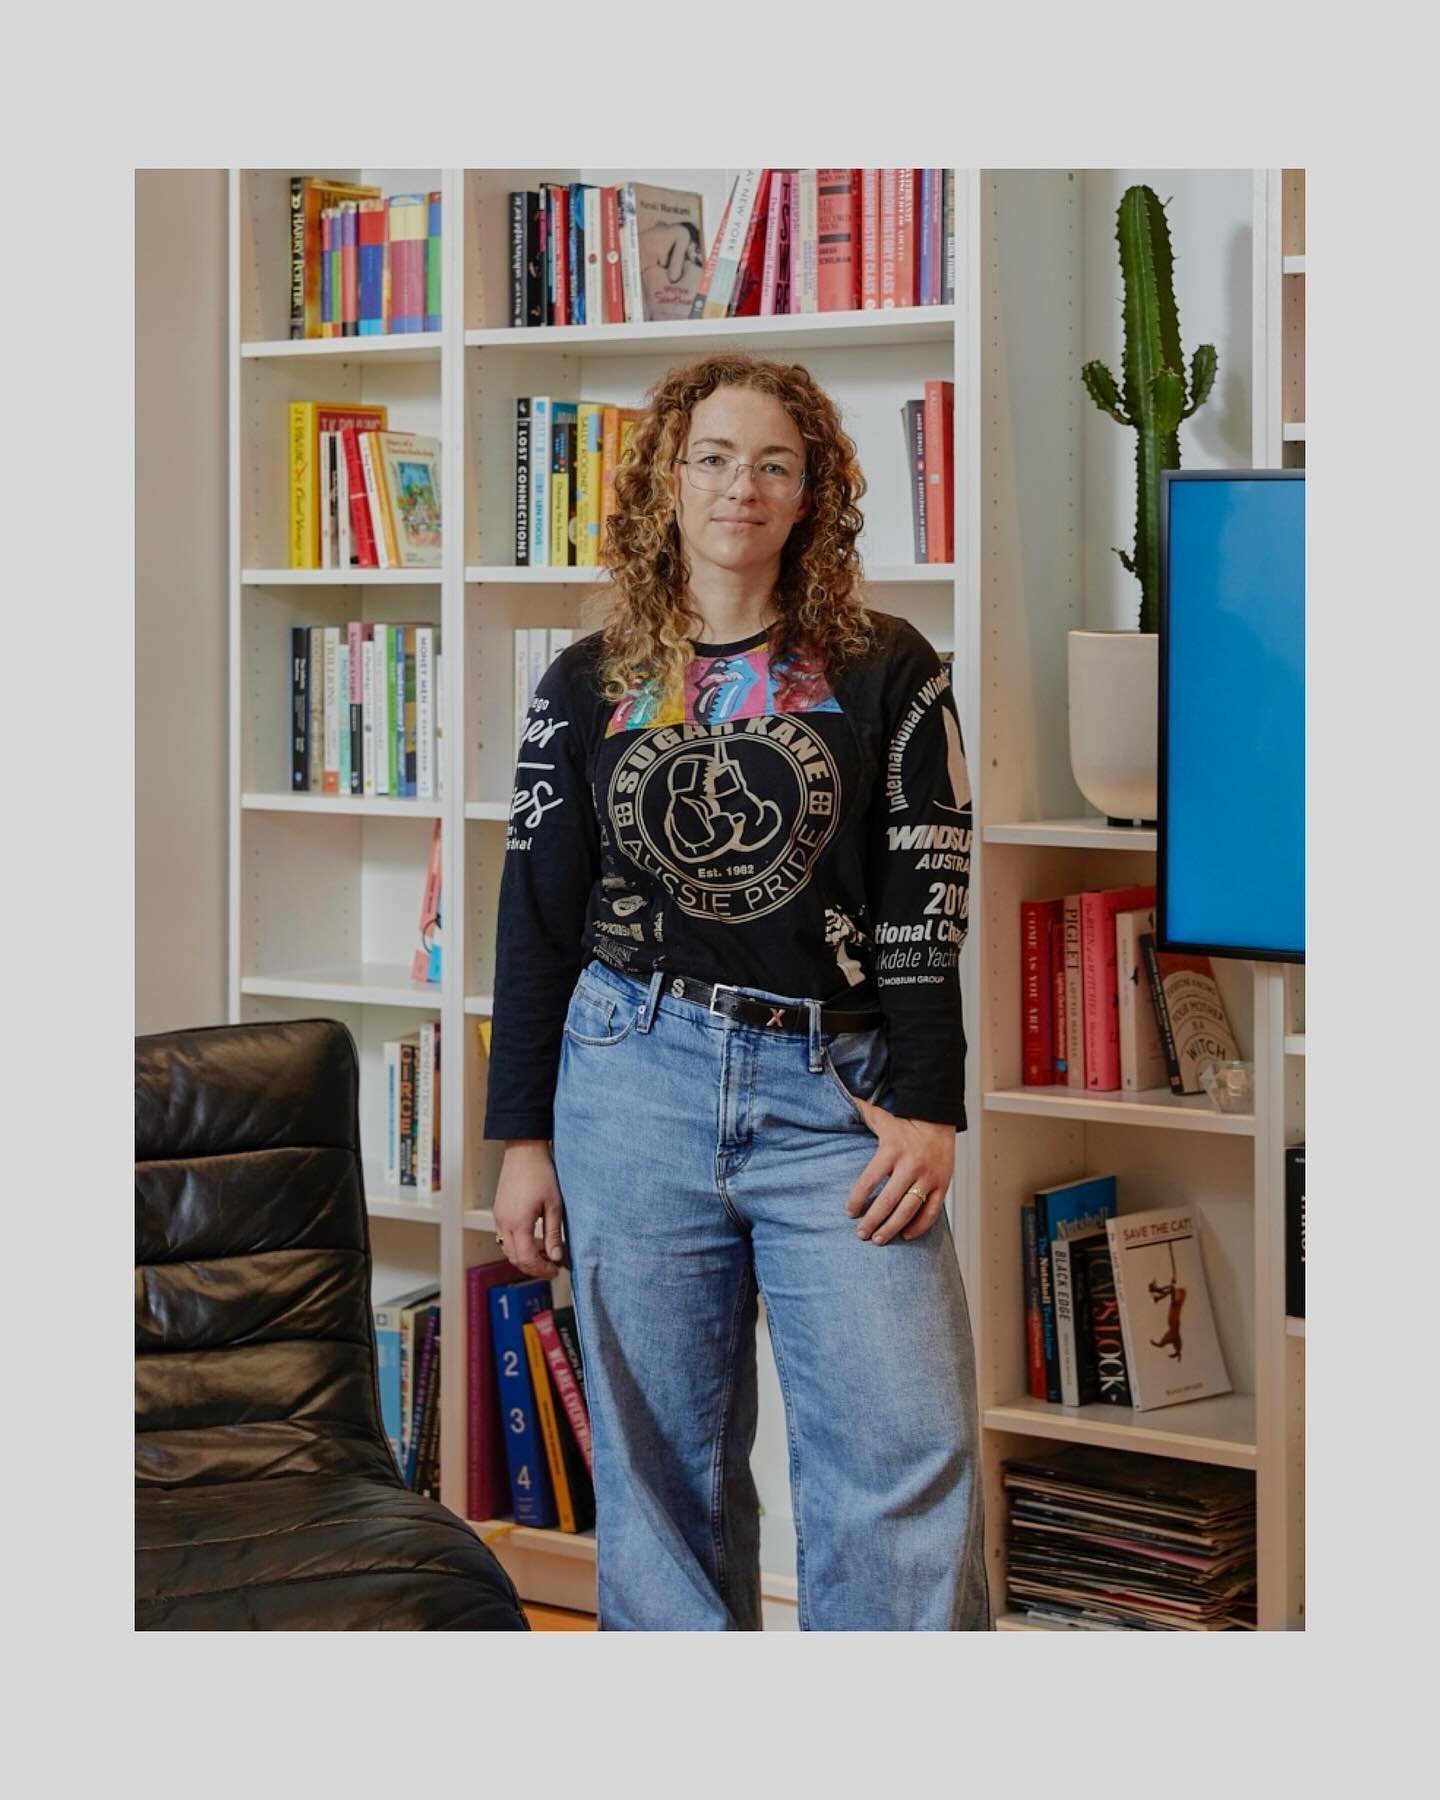 A quick visit to the home of @hannahemcelhinney, author of the book &lsquo;Rainbow History Class&rsquo; and co-host of the podcast with the same name @rainbowhistoryclass for a few portraits for her interview in this weeks @broadsheet_melb X @domainr